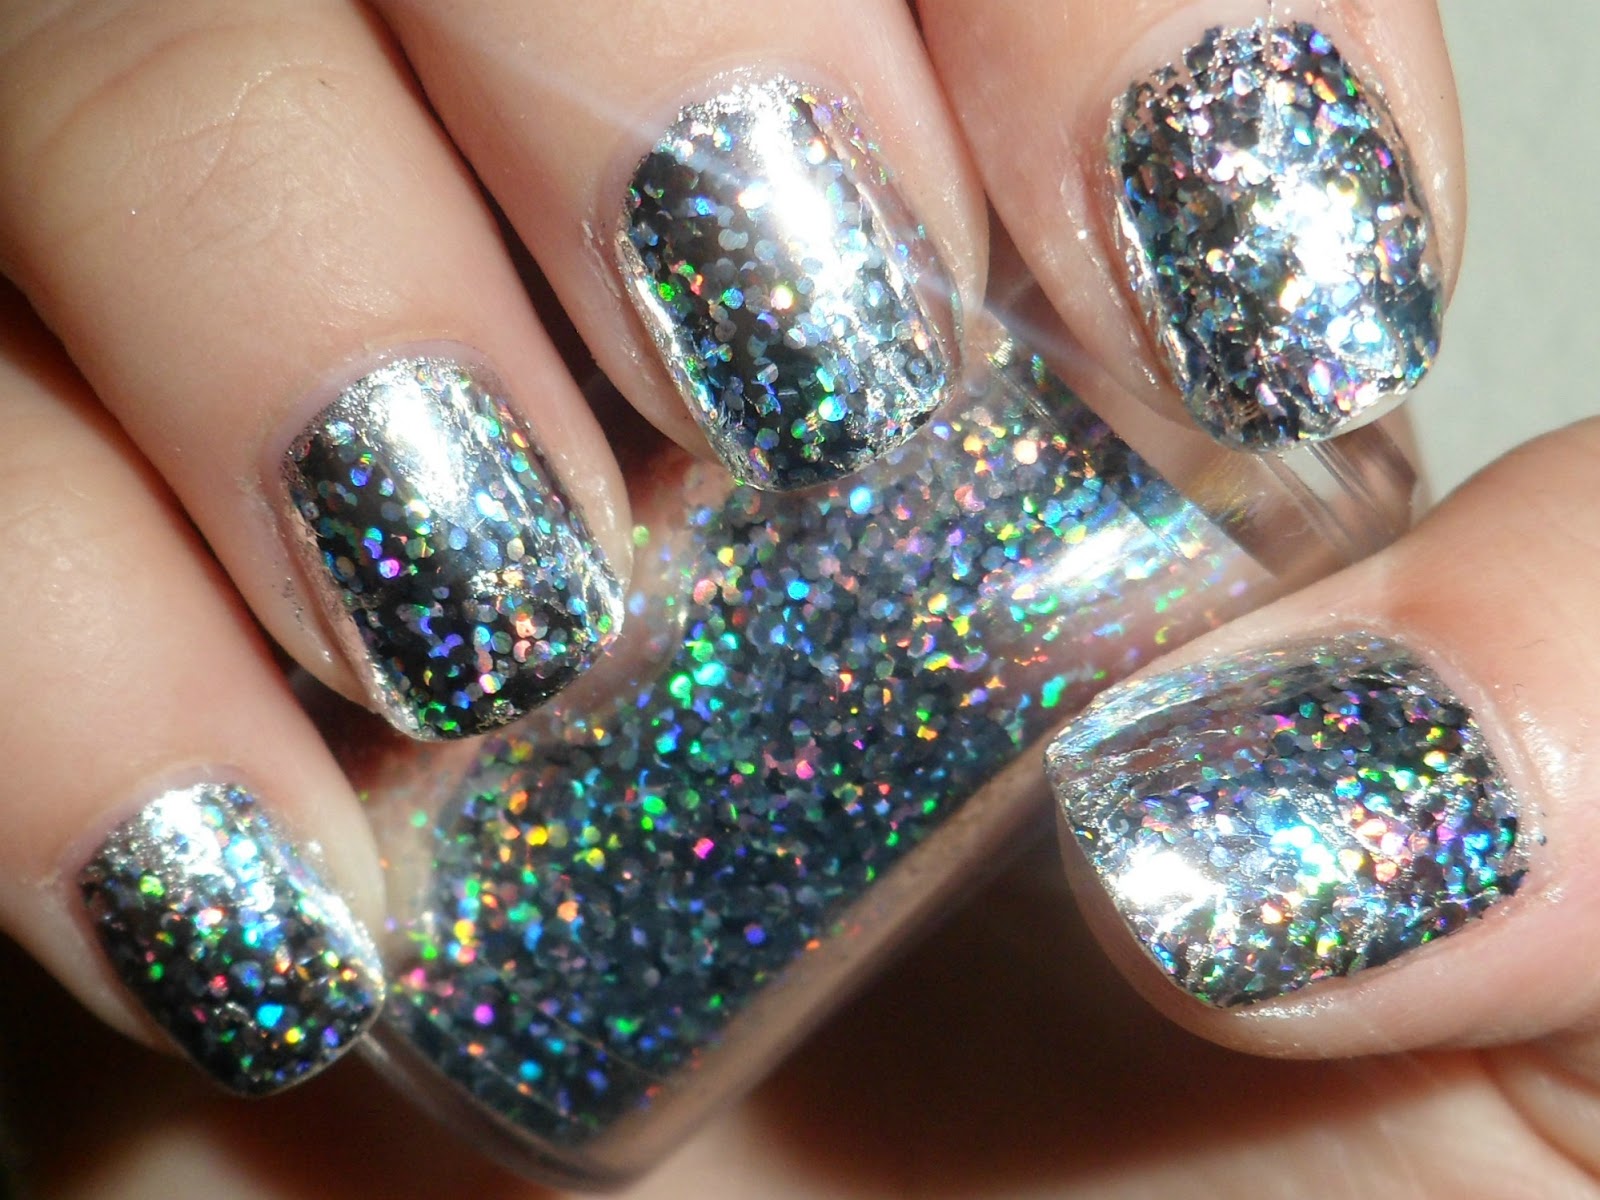 1. Foil Nail Art Designs for a Shiny and Chic Look - wide 2